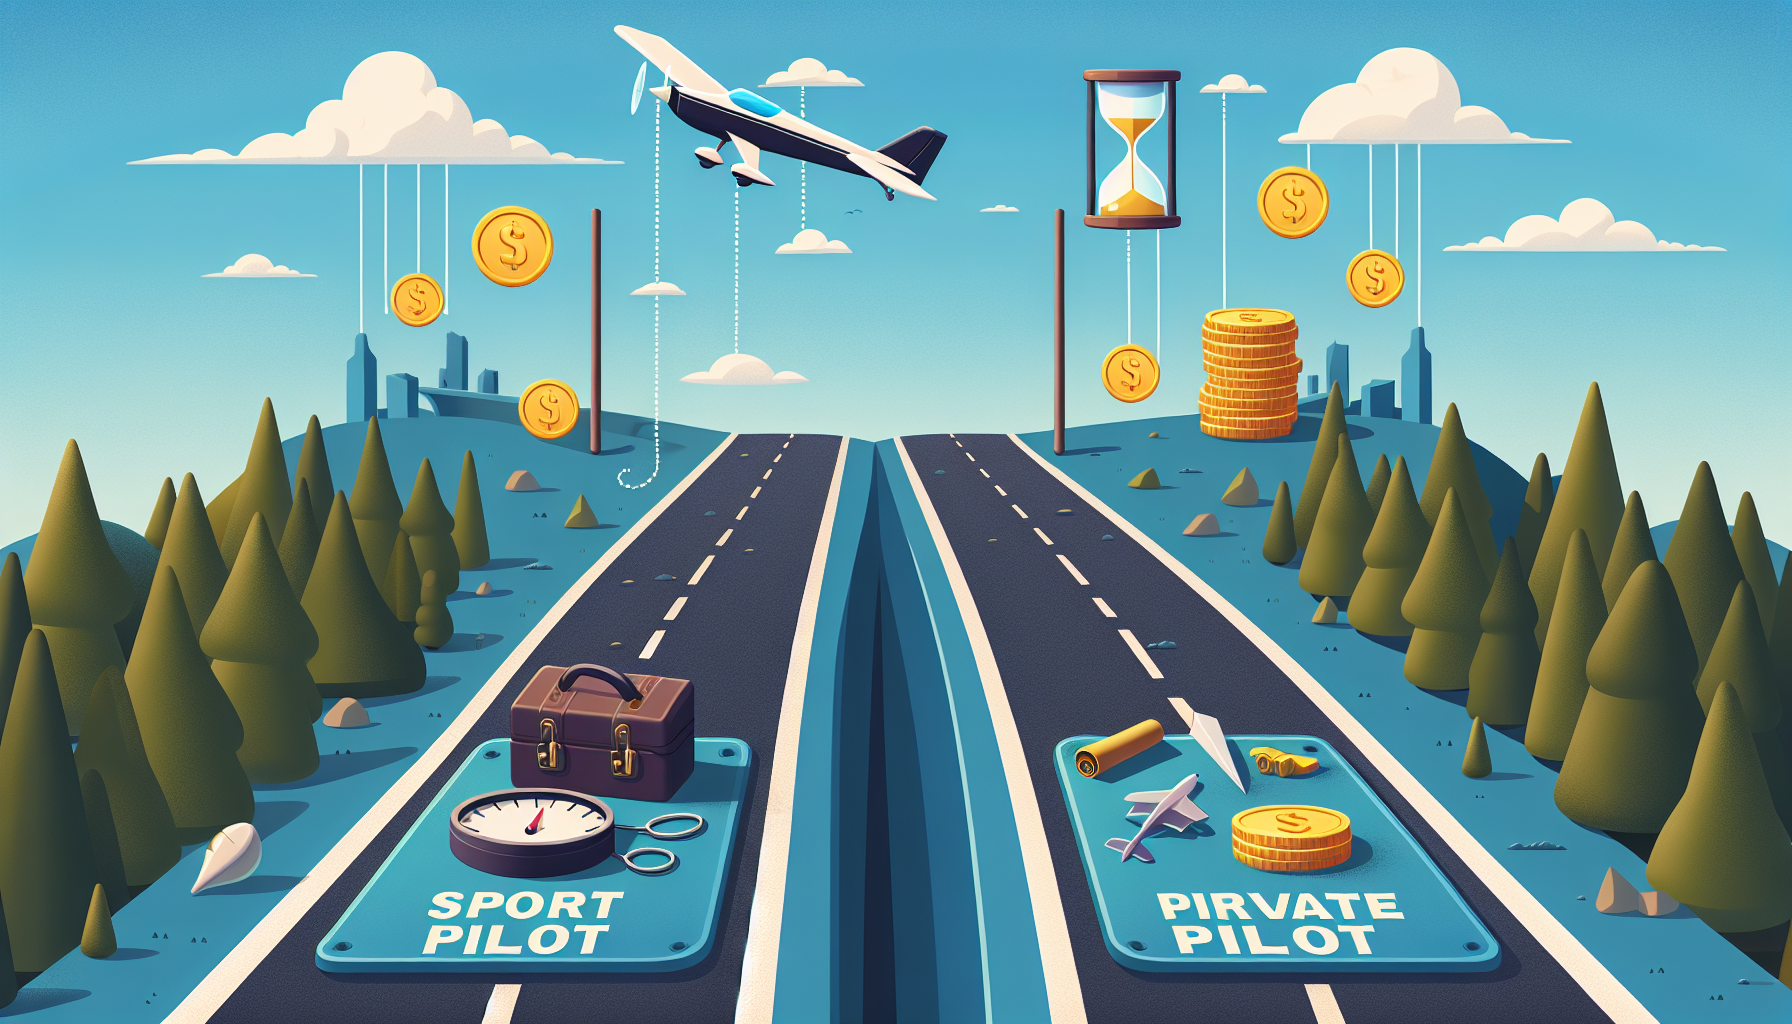 Comparison of costs and time commitments for sport pilot vs private pilot license